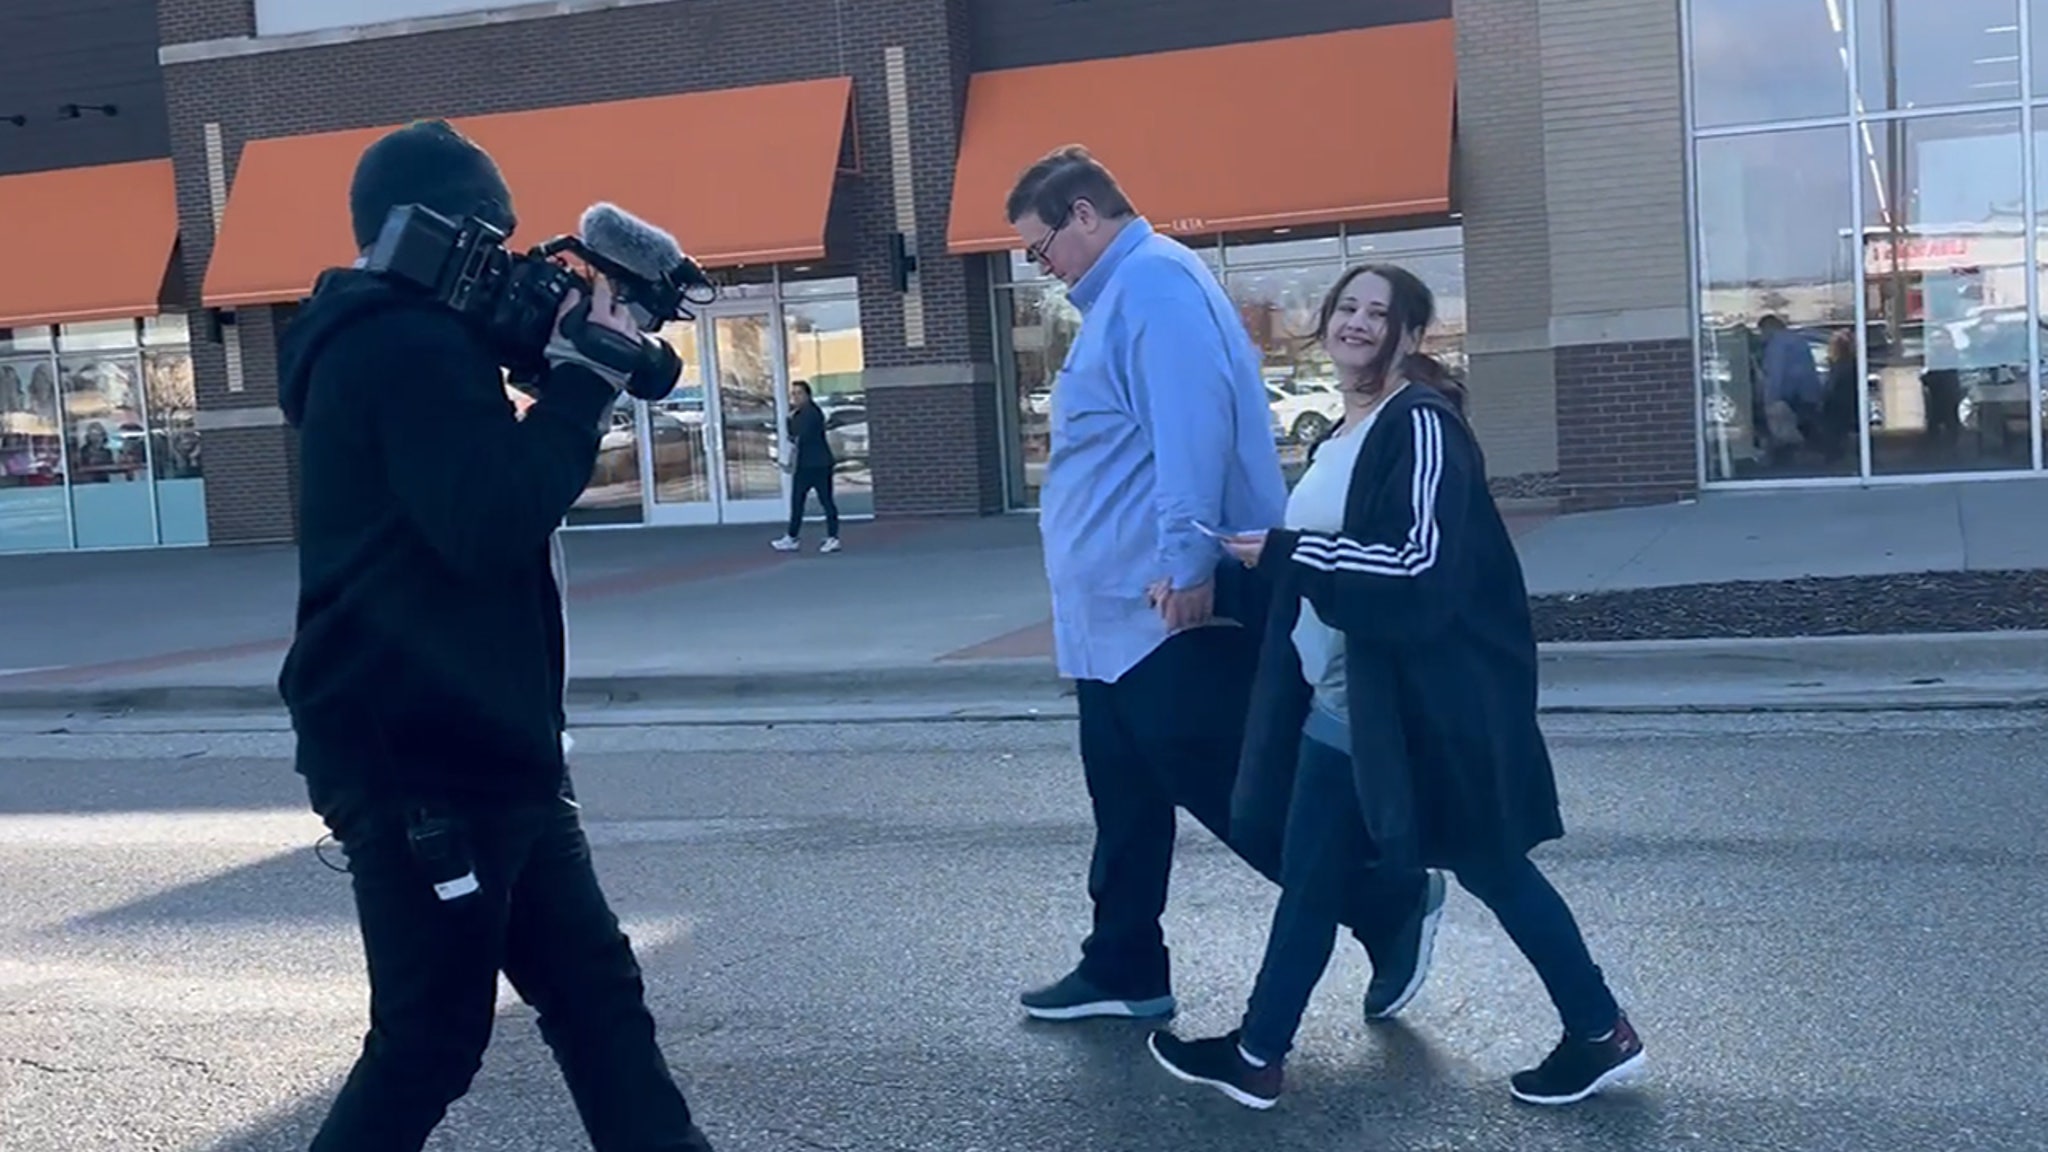 Gypsy Rose Blanchard Goes Shoe Shopping On First Day Out of Prison